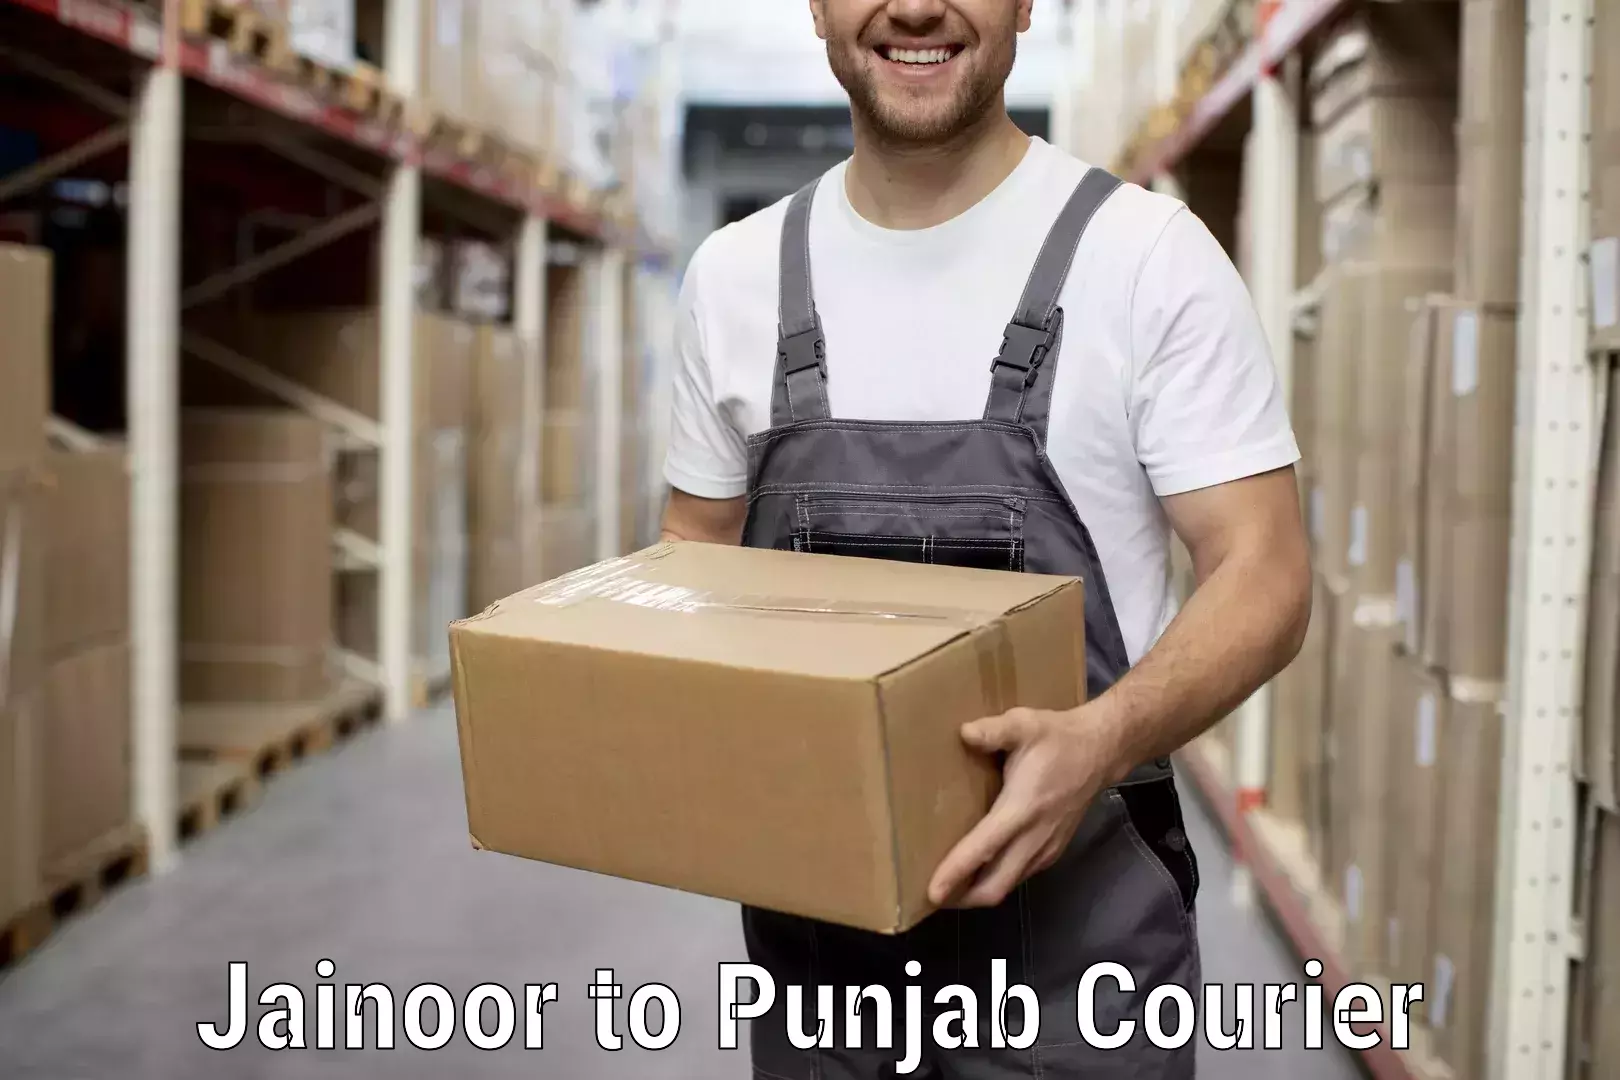 Professional home movers Jainoor to Malout